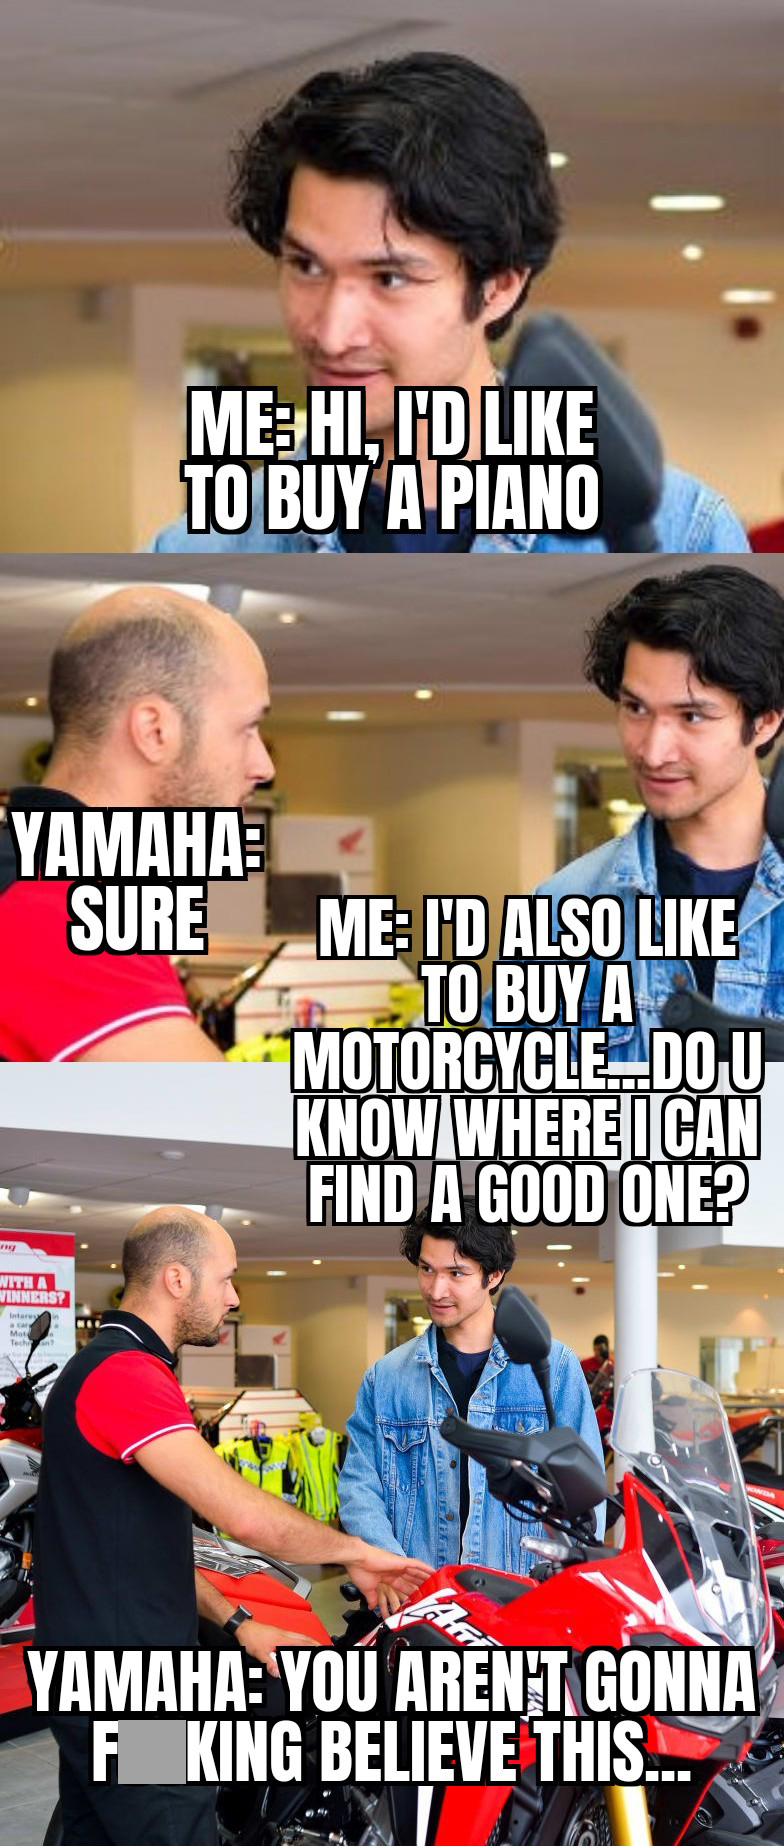 learning - MeHi, I'D To Buy A Piano Yamaha Sure Me I'D Also To Buy A MotorcycleDou Know Where I Can Find A Good One? Yamaha You Aren'T Gonna F King Believe This...